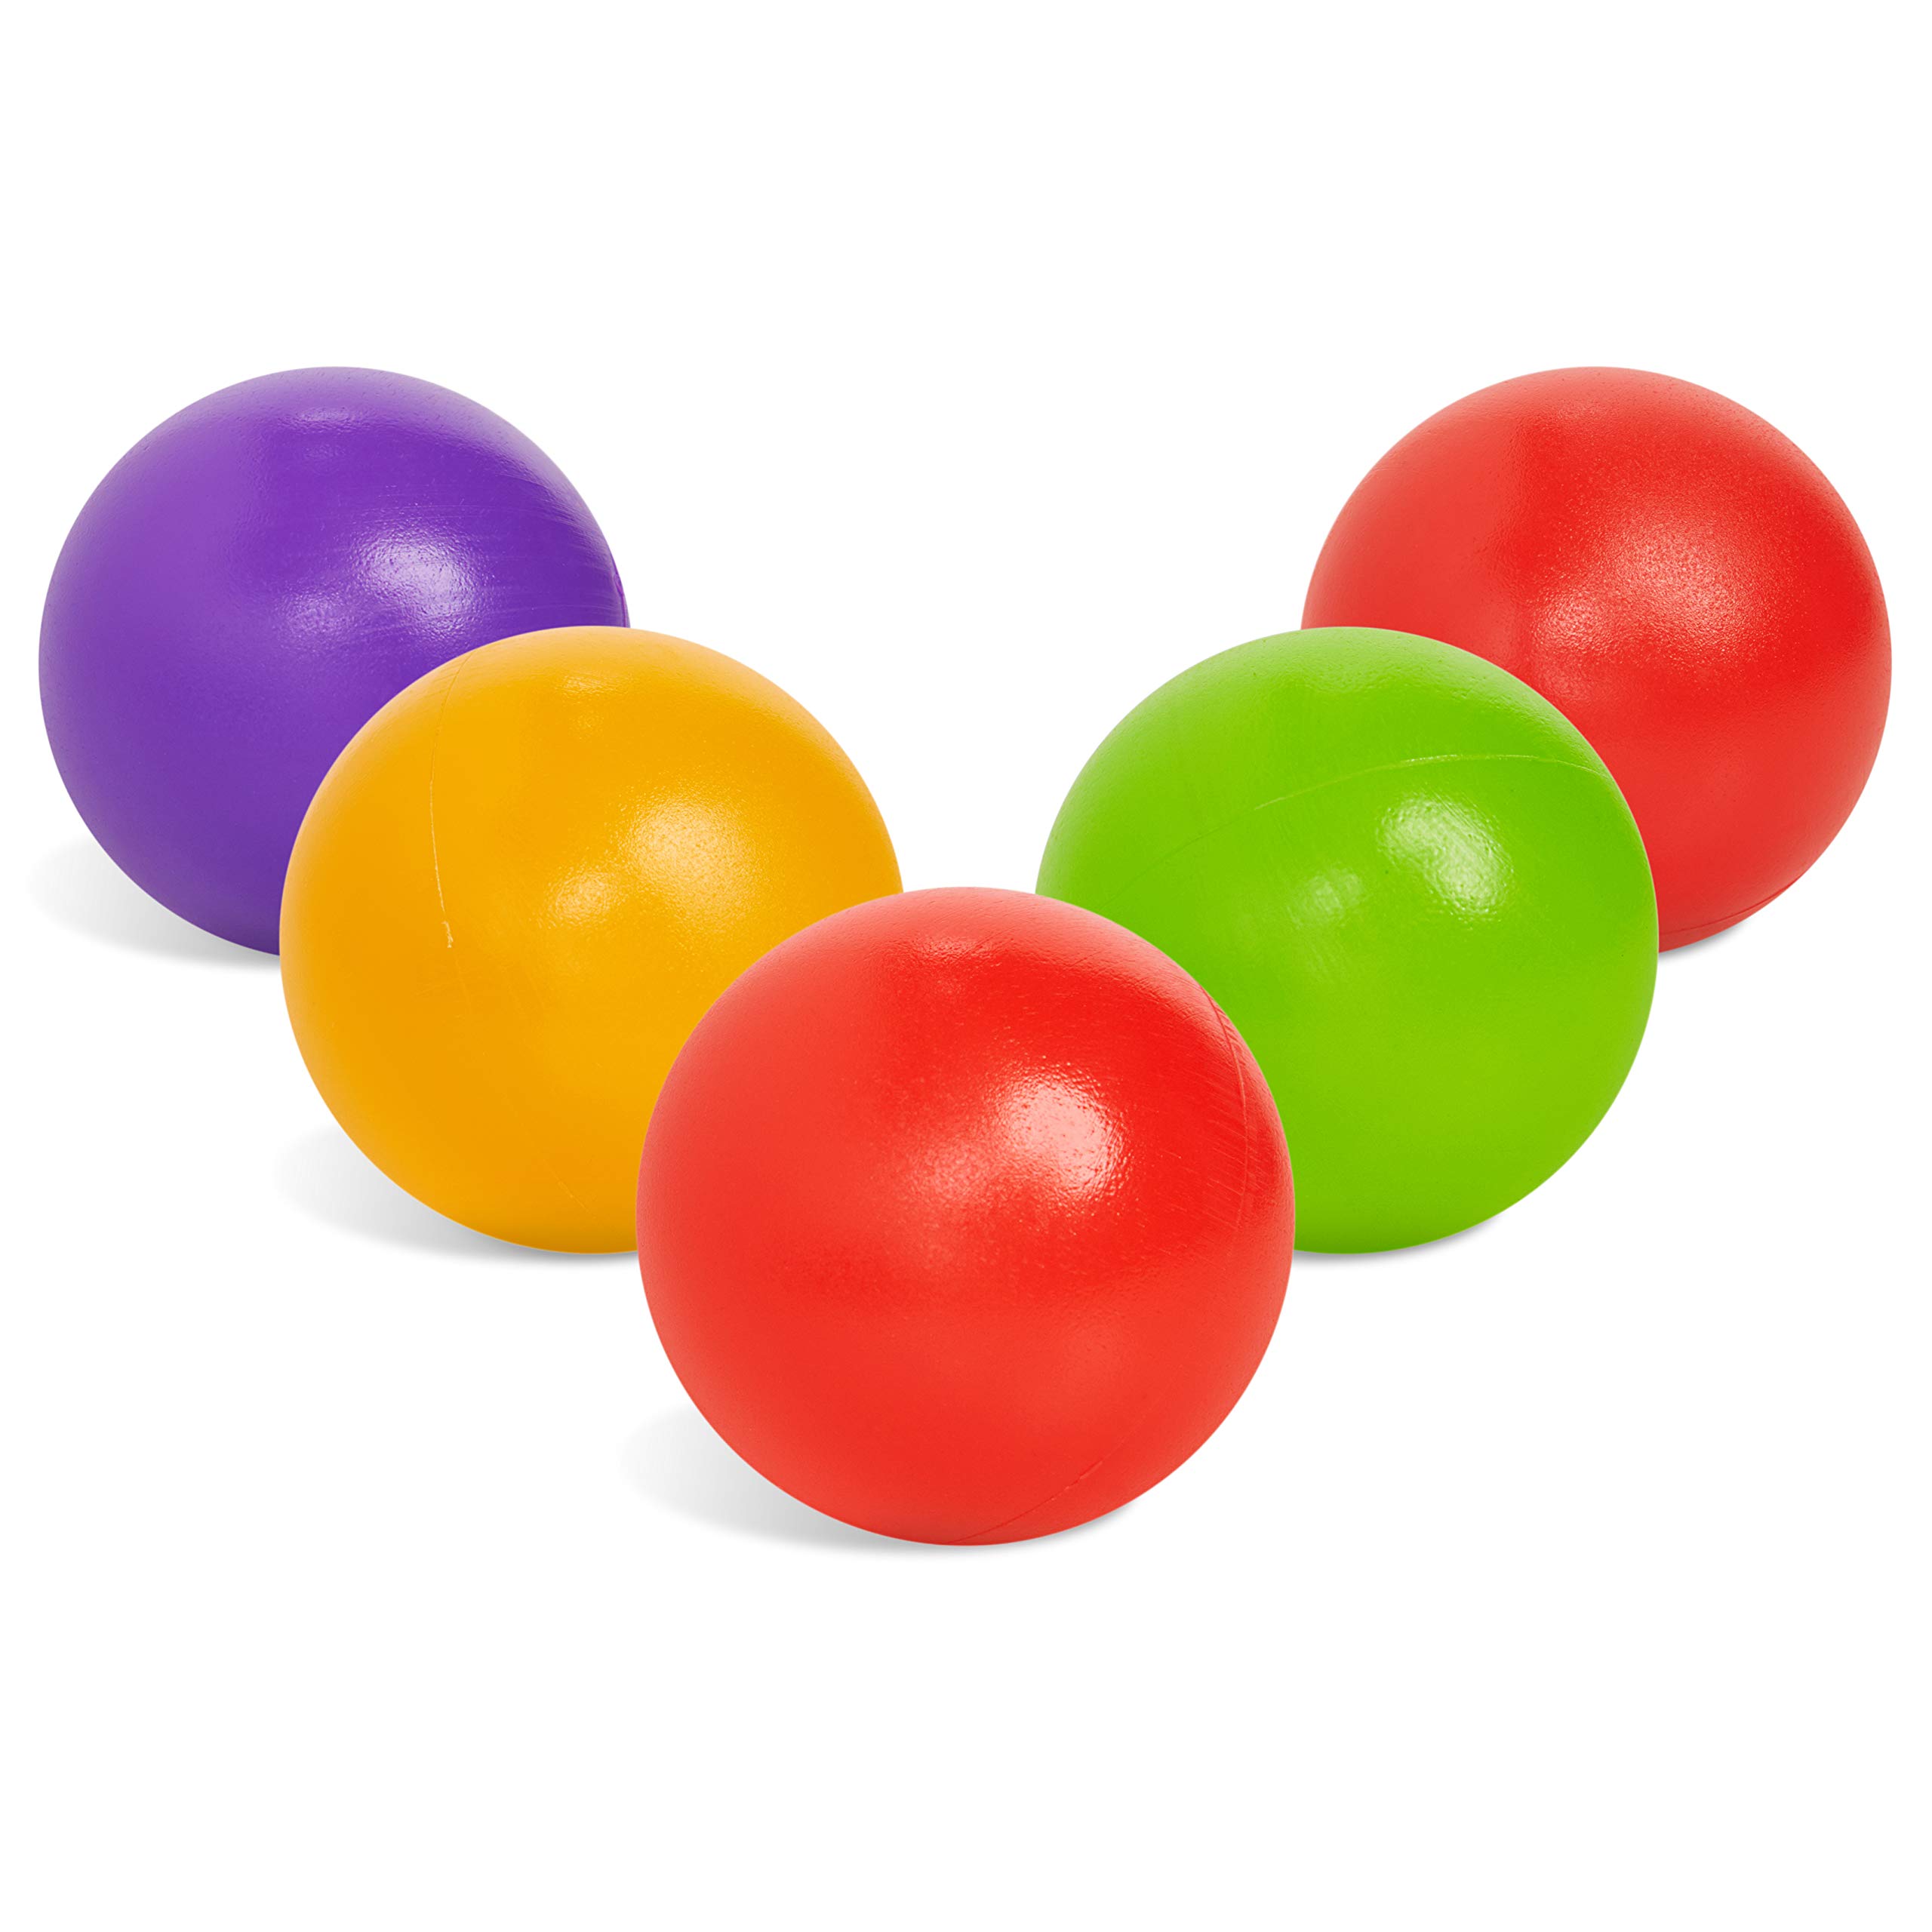 Multi-Colored Replacement Ball Set of 5 for Playskool Ball Popper Toys | Compatible with Busy Ball Popper Toy and playskool Elephant Ball Popper Replacement Balls | Colorful Baby Balls and Toy Balls